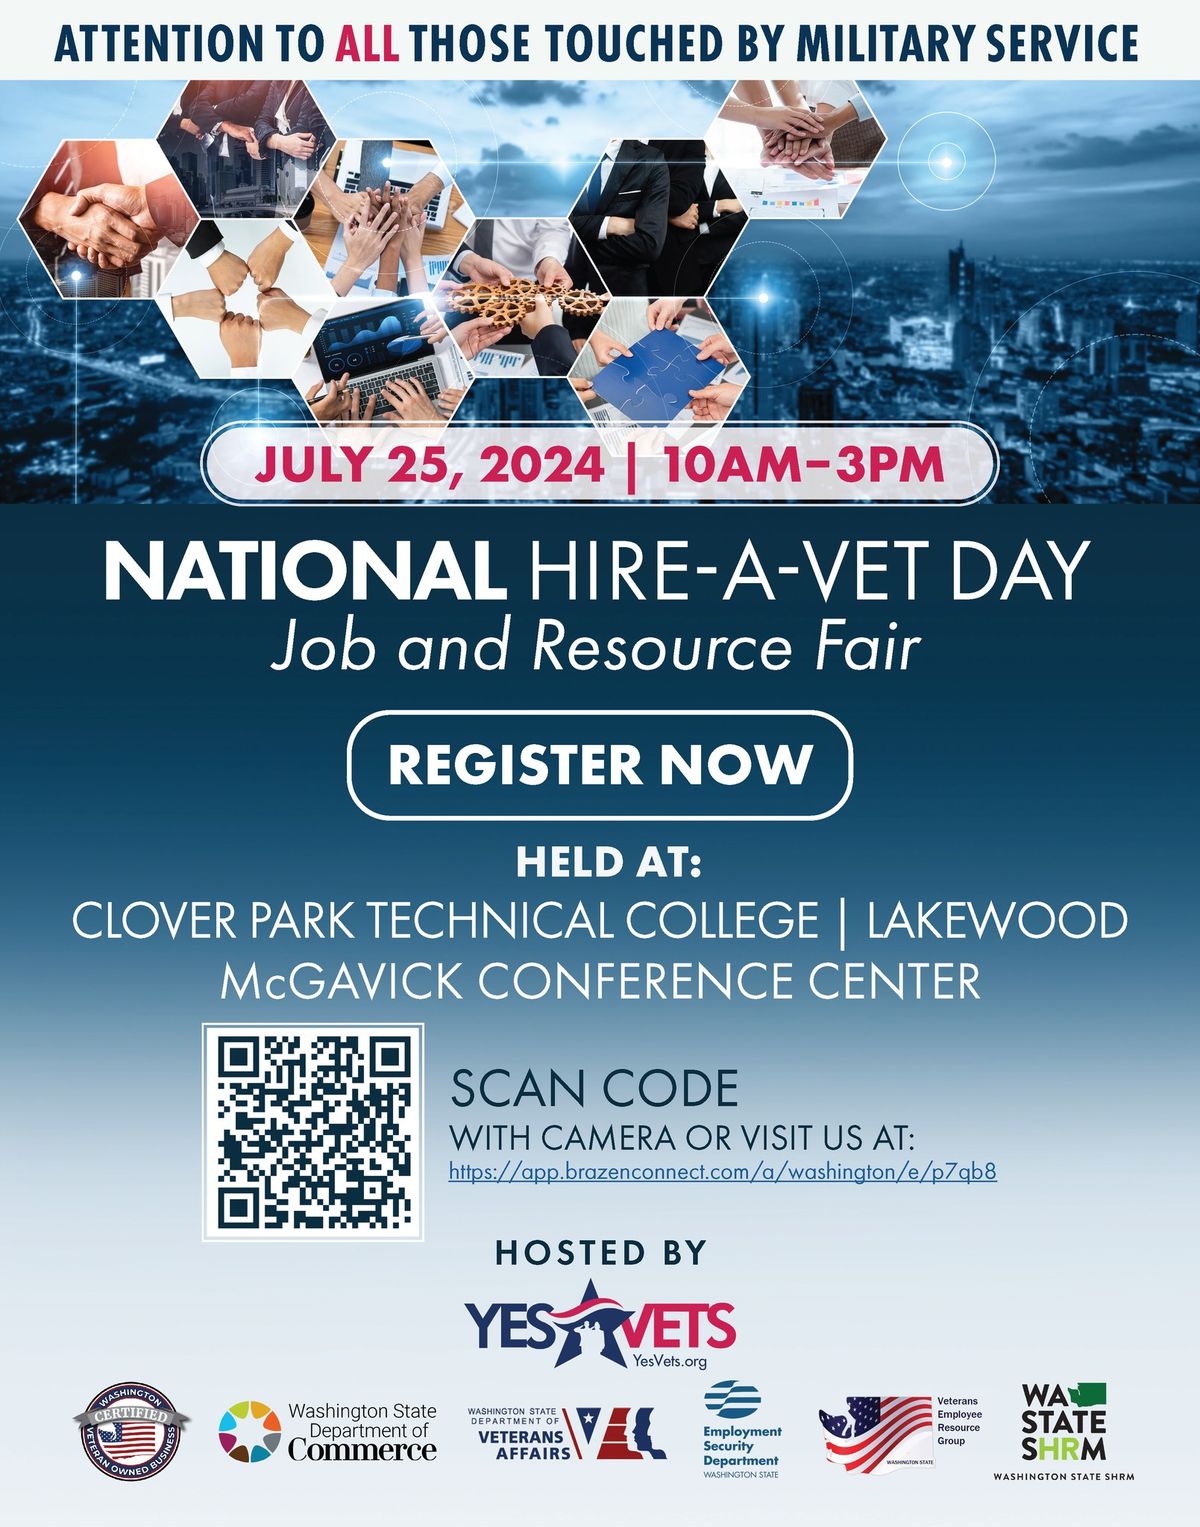 National Hire-a-Vet Day Job and Resource Fair 2024 - YesVets - Washington State